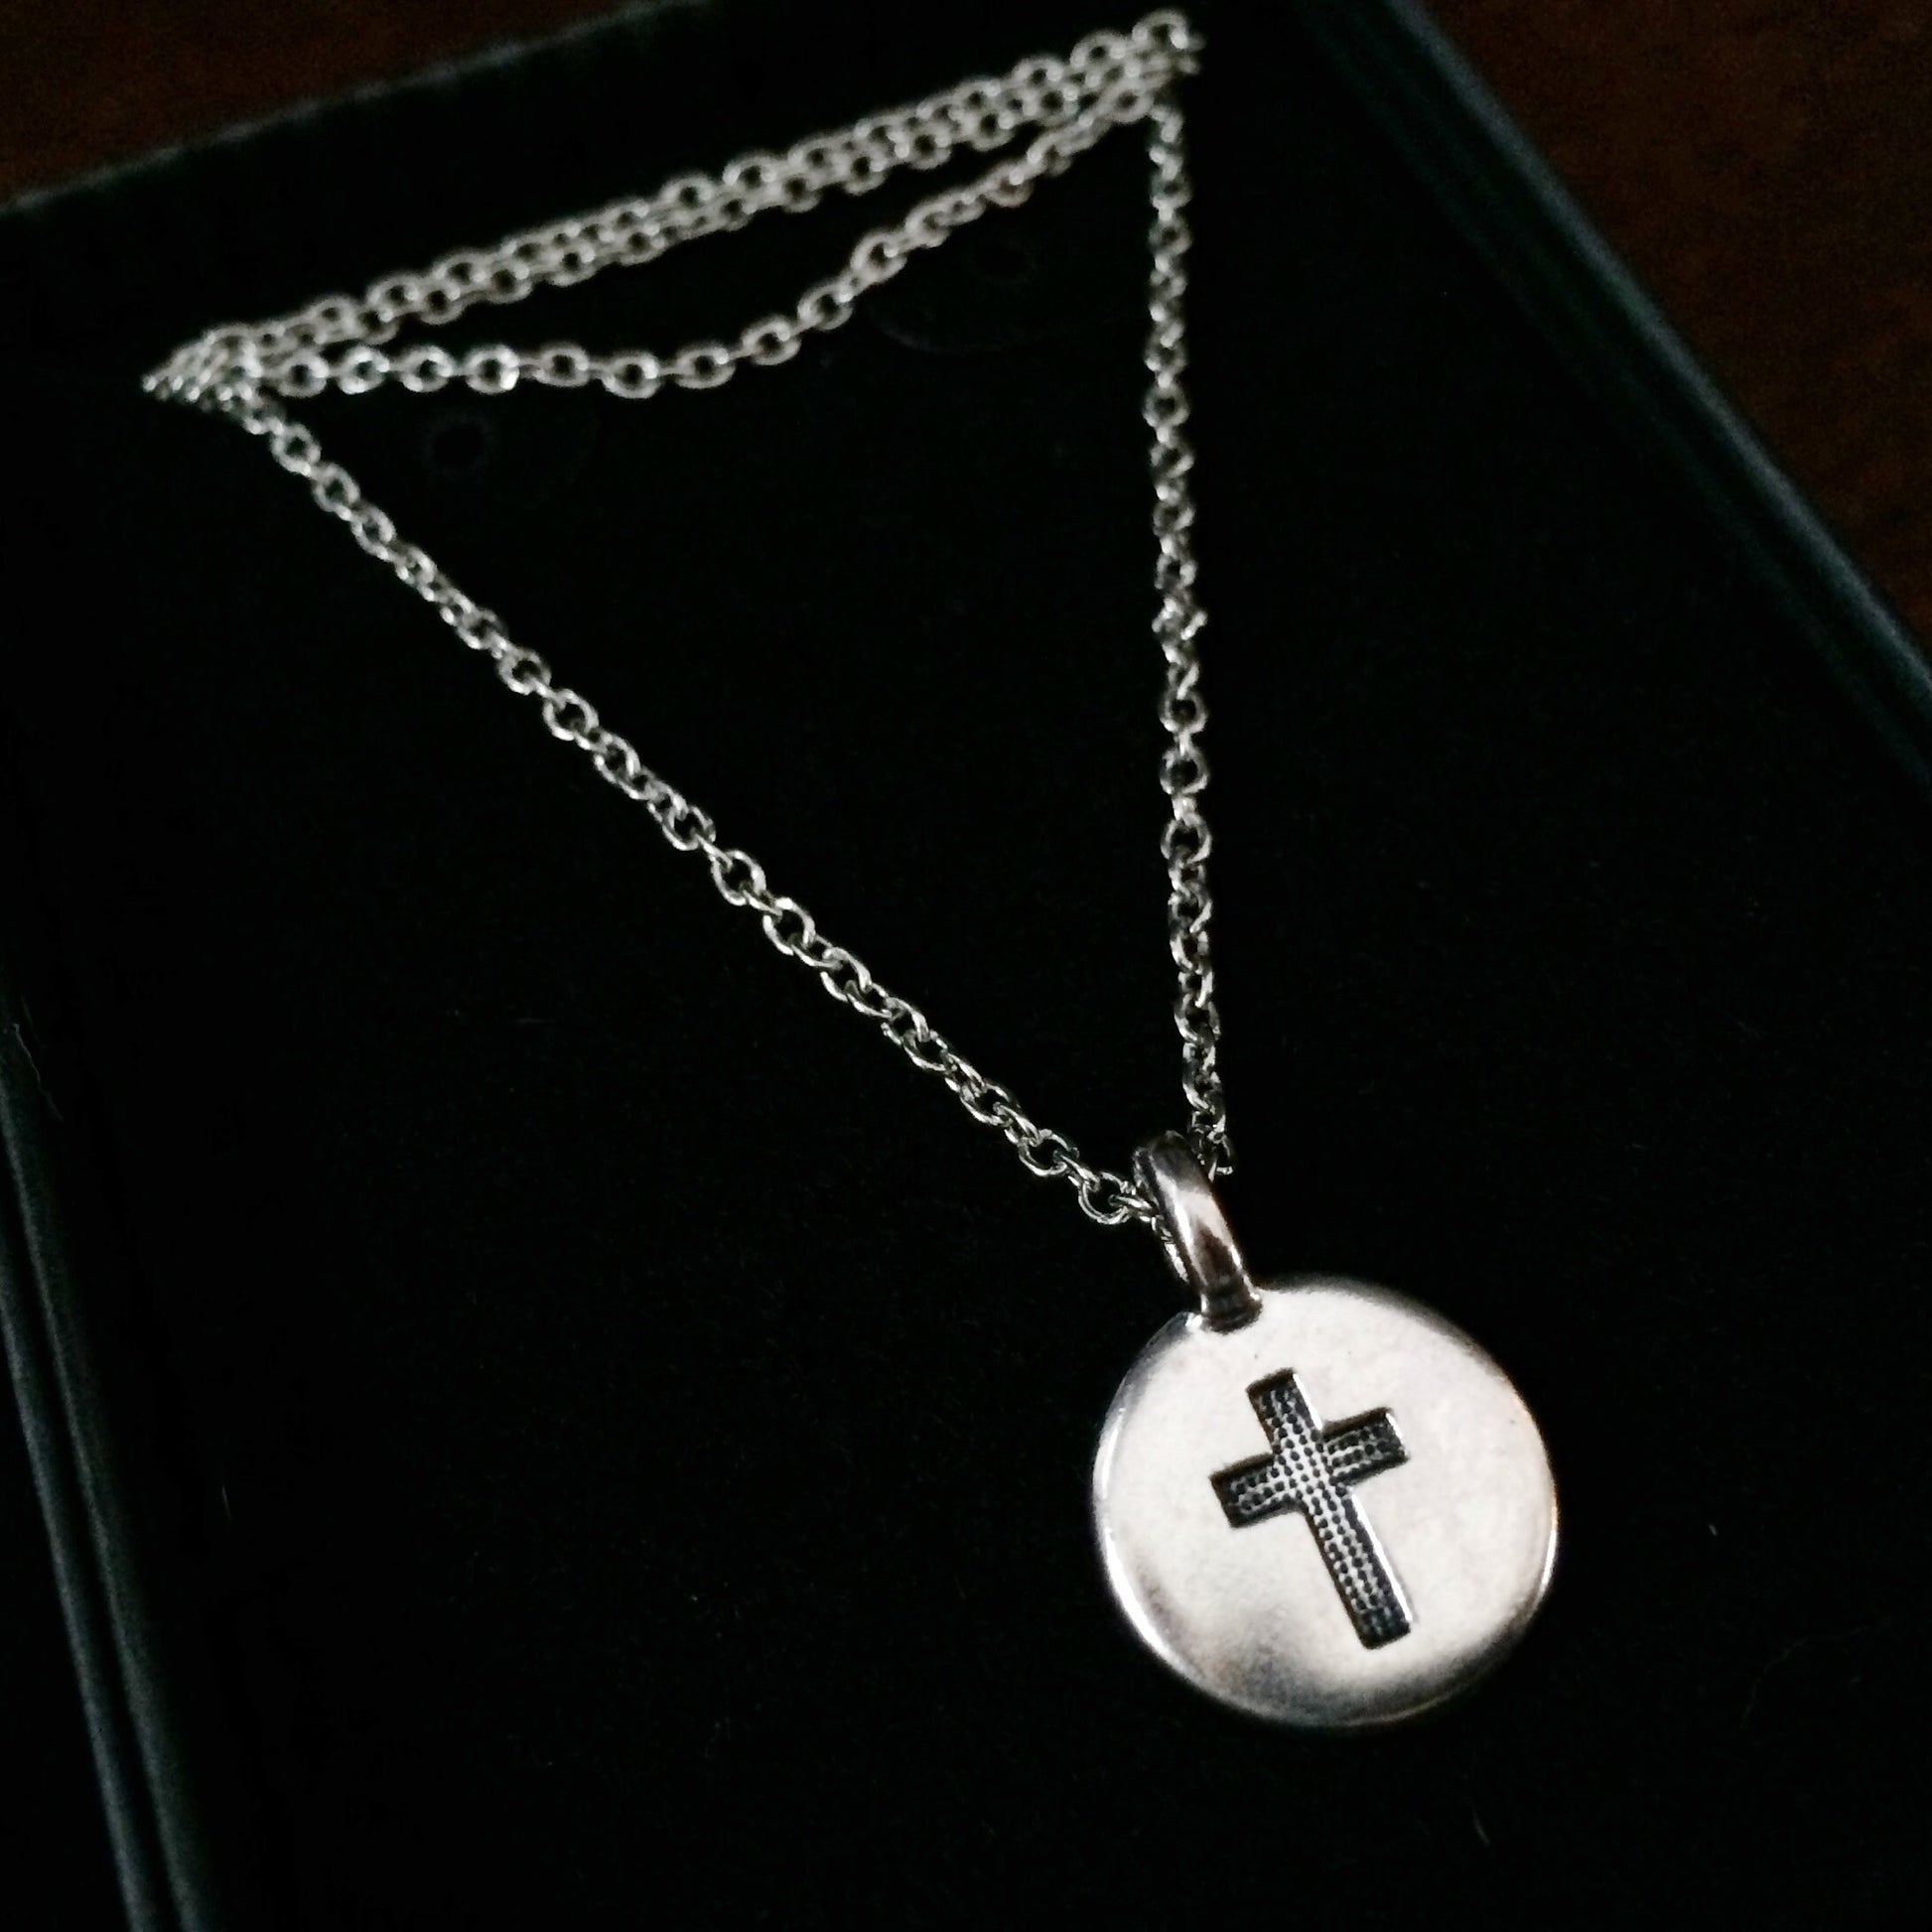 Small Silver Cross Pendant, Christian Jewelry, Silver Charm Necklace, Confirmation Gift, Religious Gift for Women